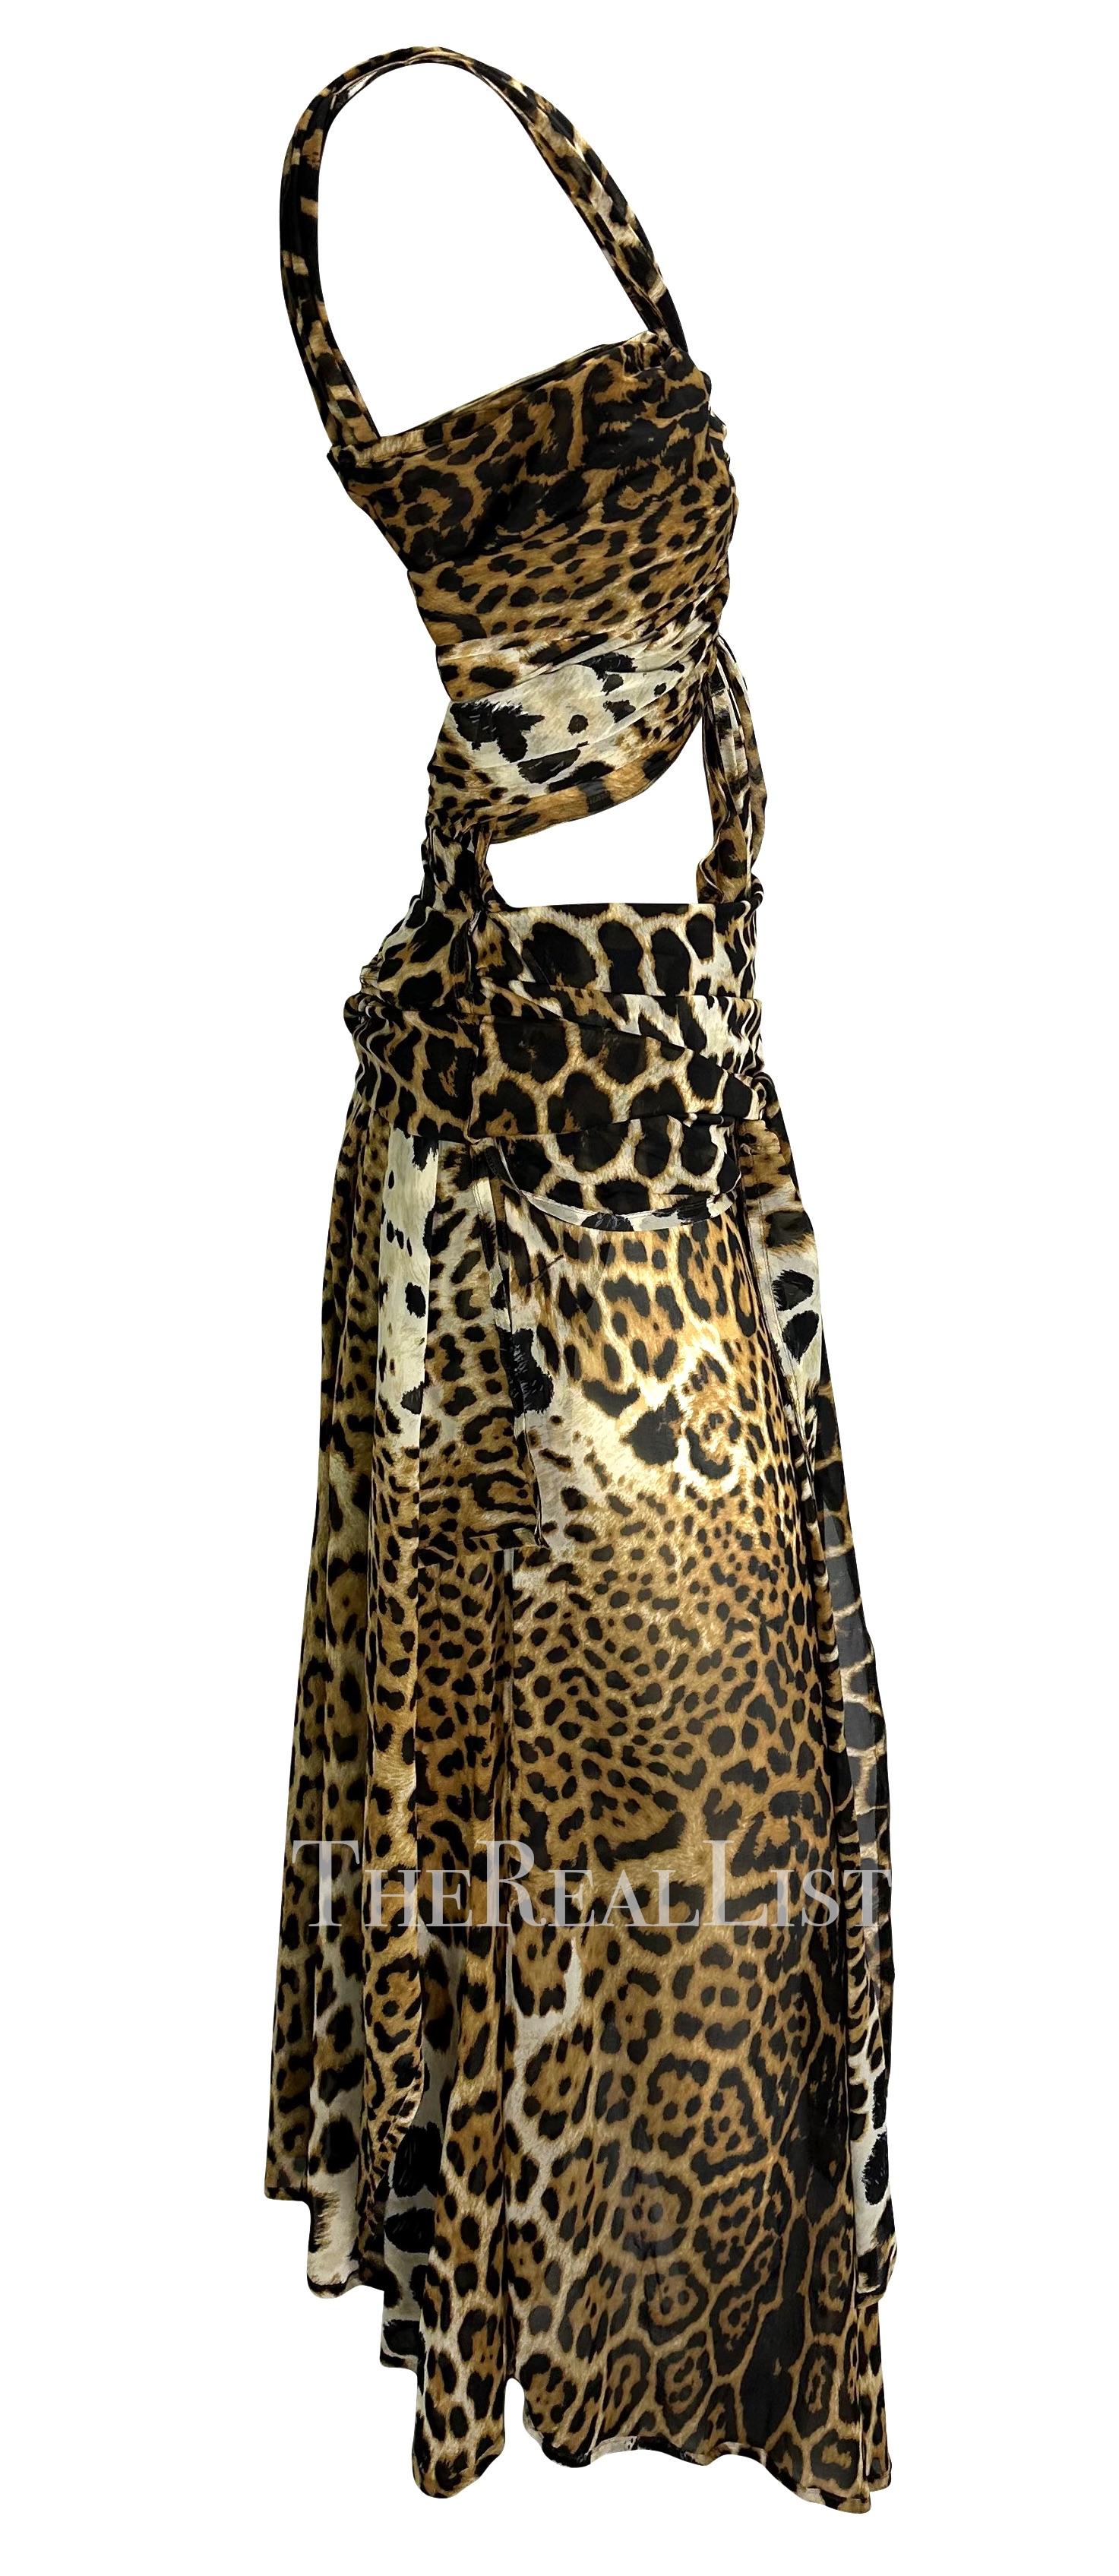 S/S 2002 Yves Saint Laurent by Tom Ford Runway Cheetah Print Chiffon Wrap Gown For Sale 10